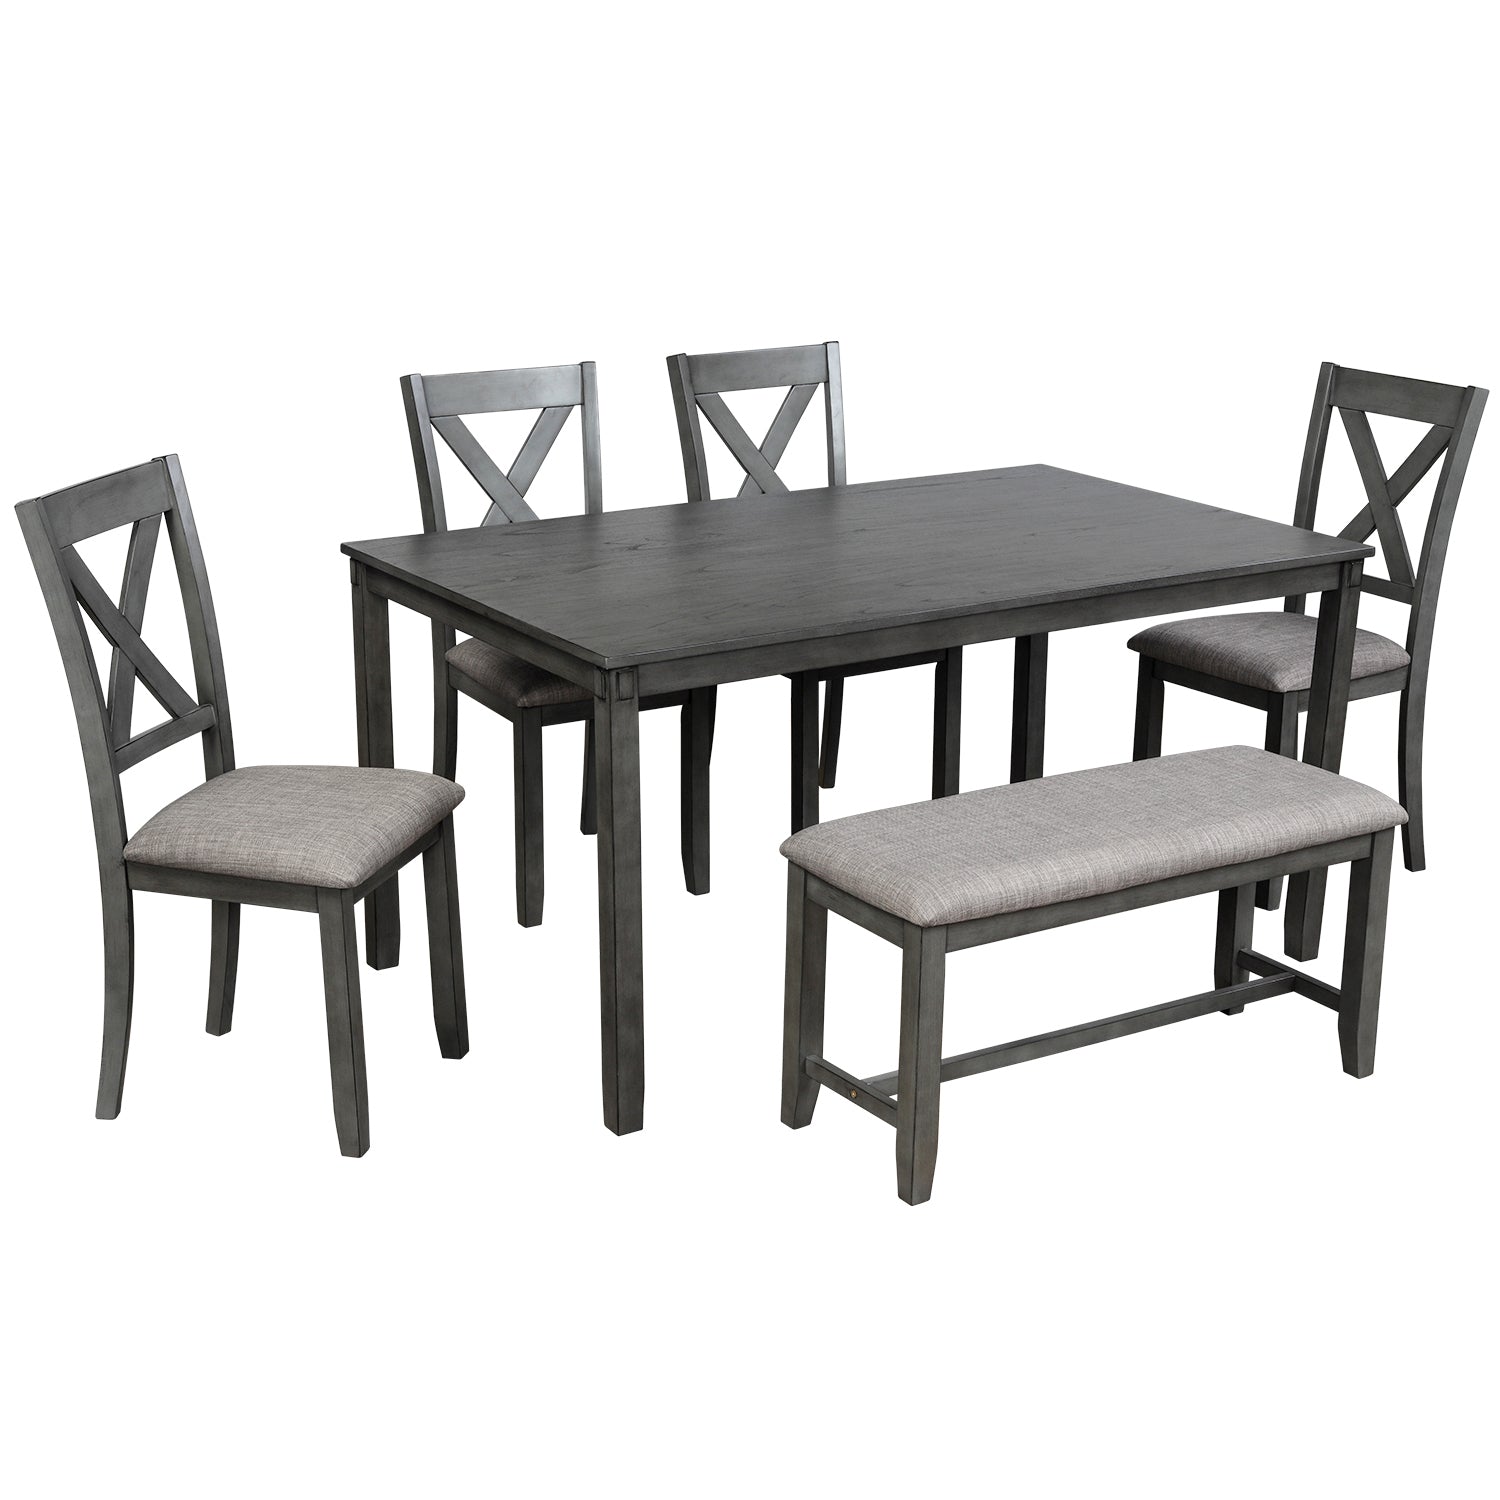 6-Piece Kitchen Dining Table Set Wooden Rectangular Dining Table, 4 Dining Chair and Bench Family Furniture for 6 People (Grey)-Boyel Living